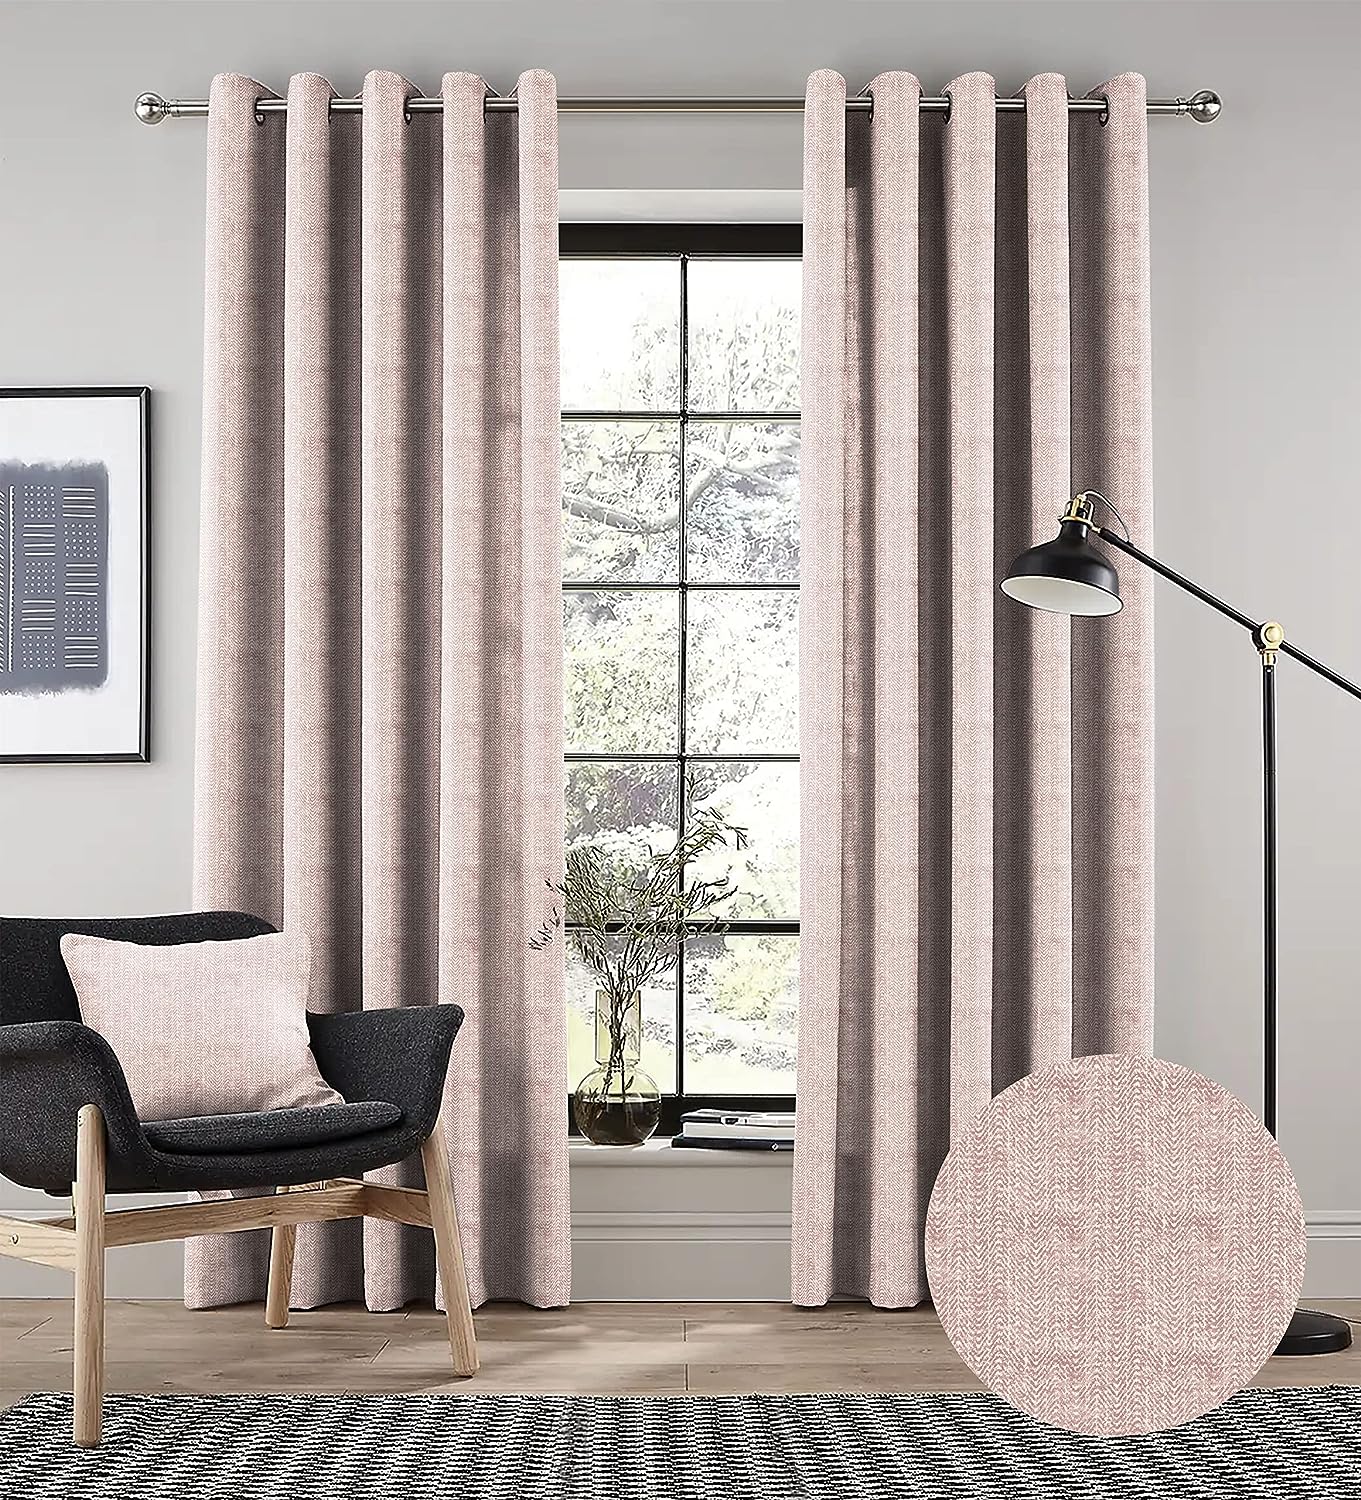 TURIN BABY PINK BLACKOUT CURTAIN